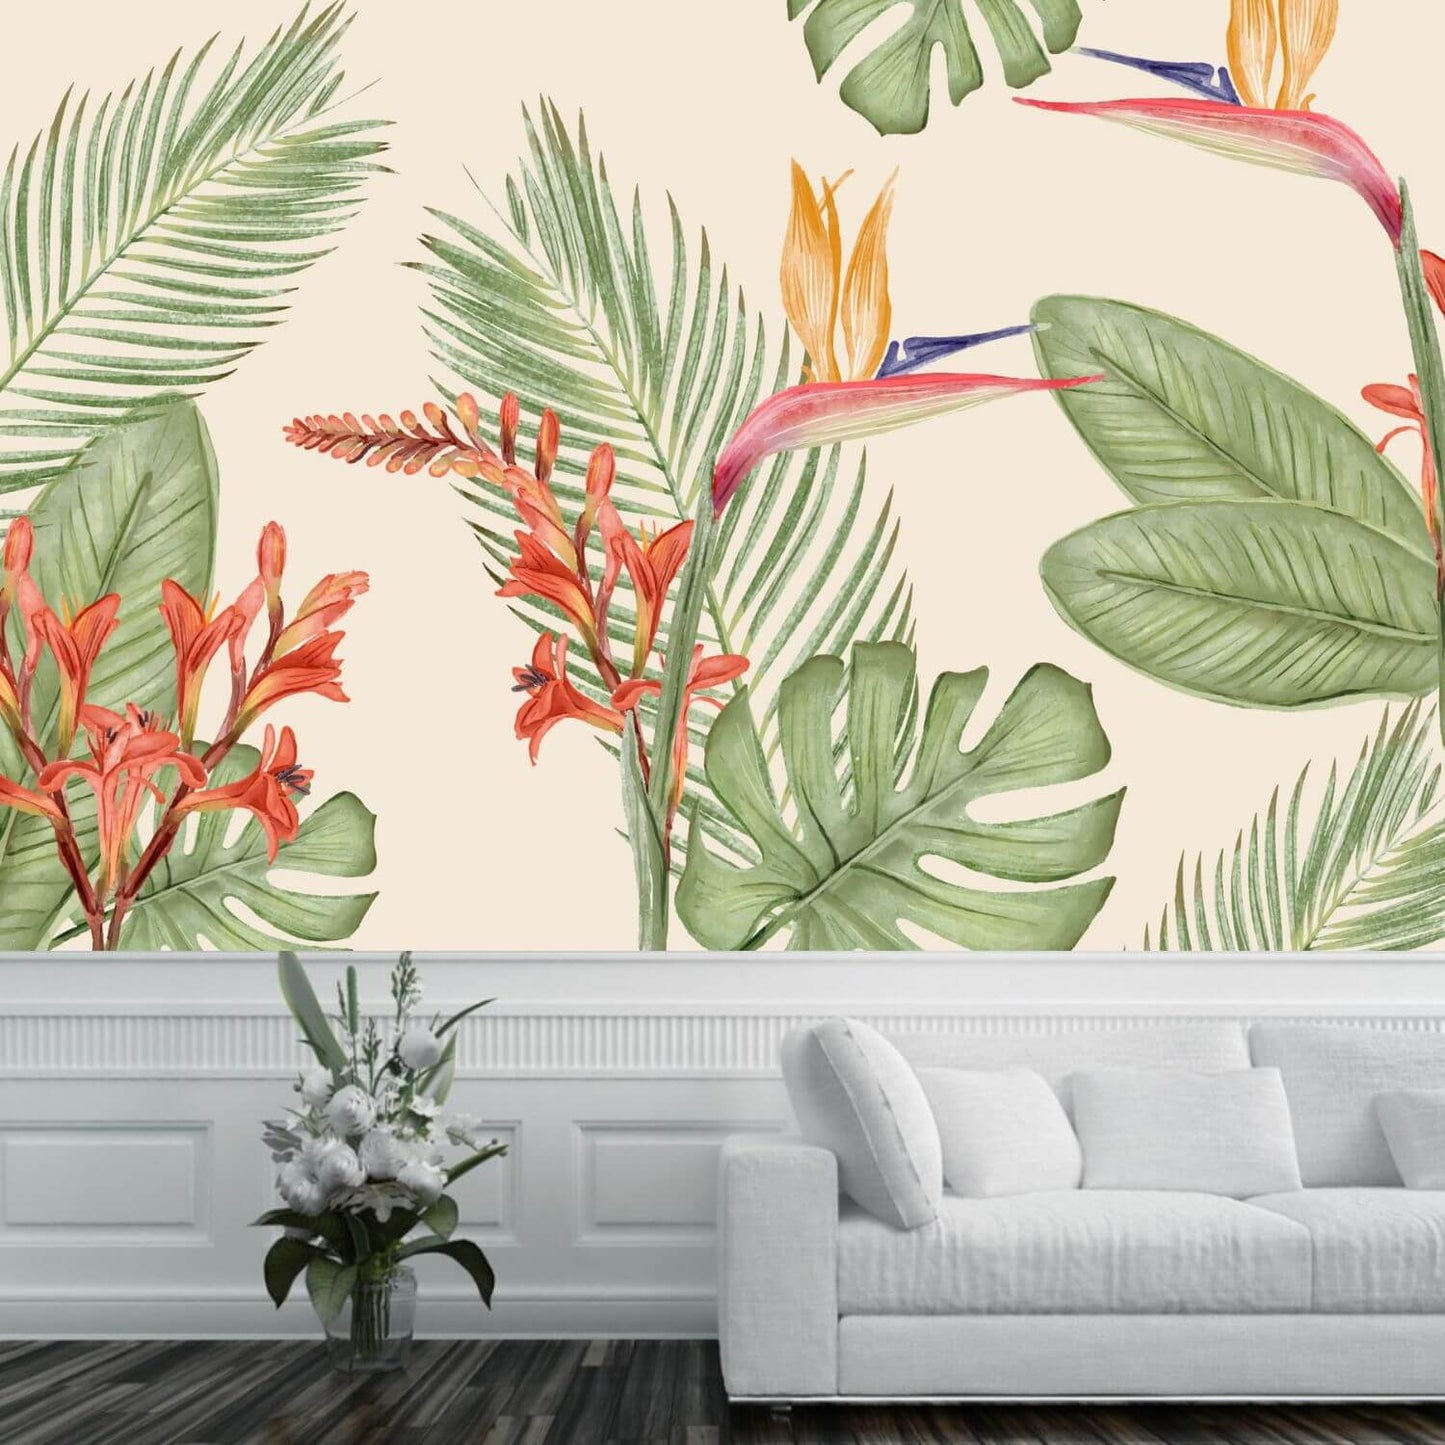 Rainforest Leaves and Flowers Mural Wallpaper (SqM)